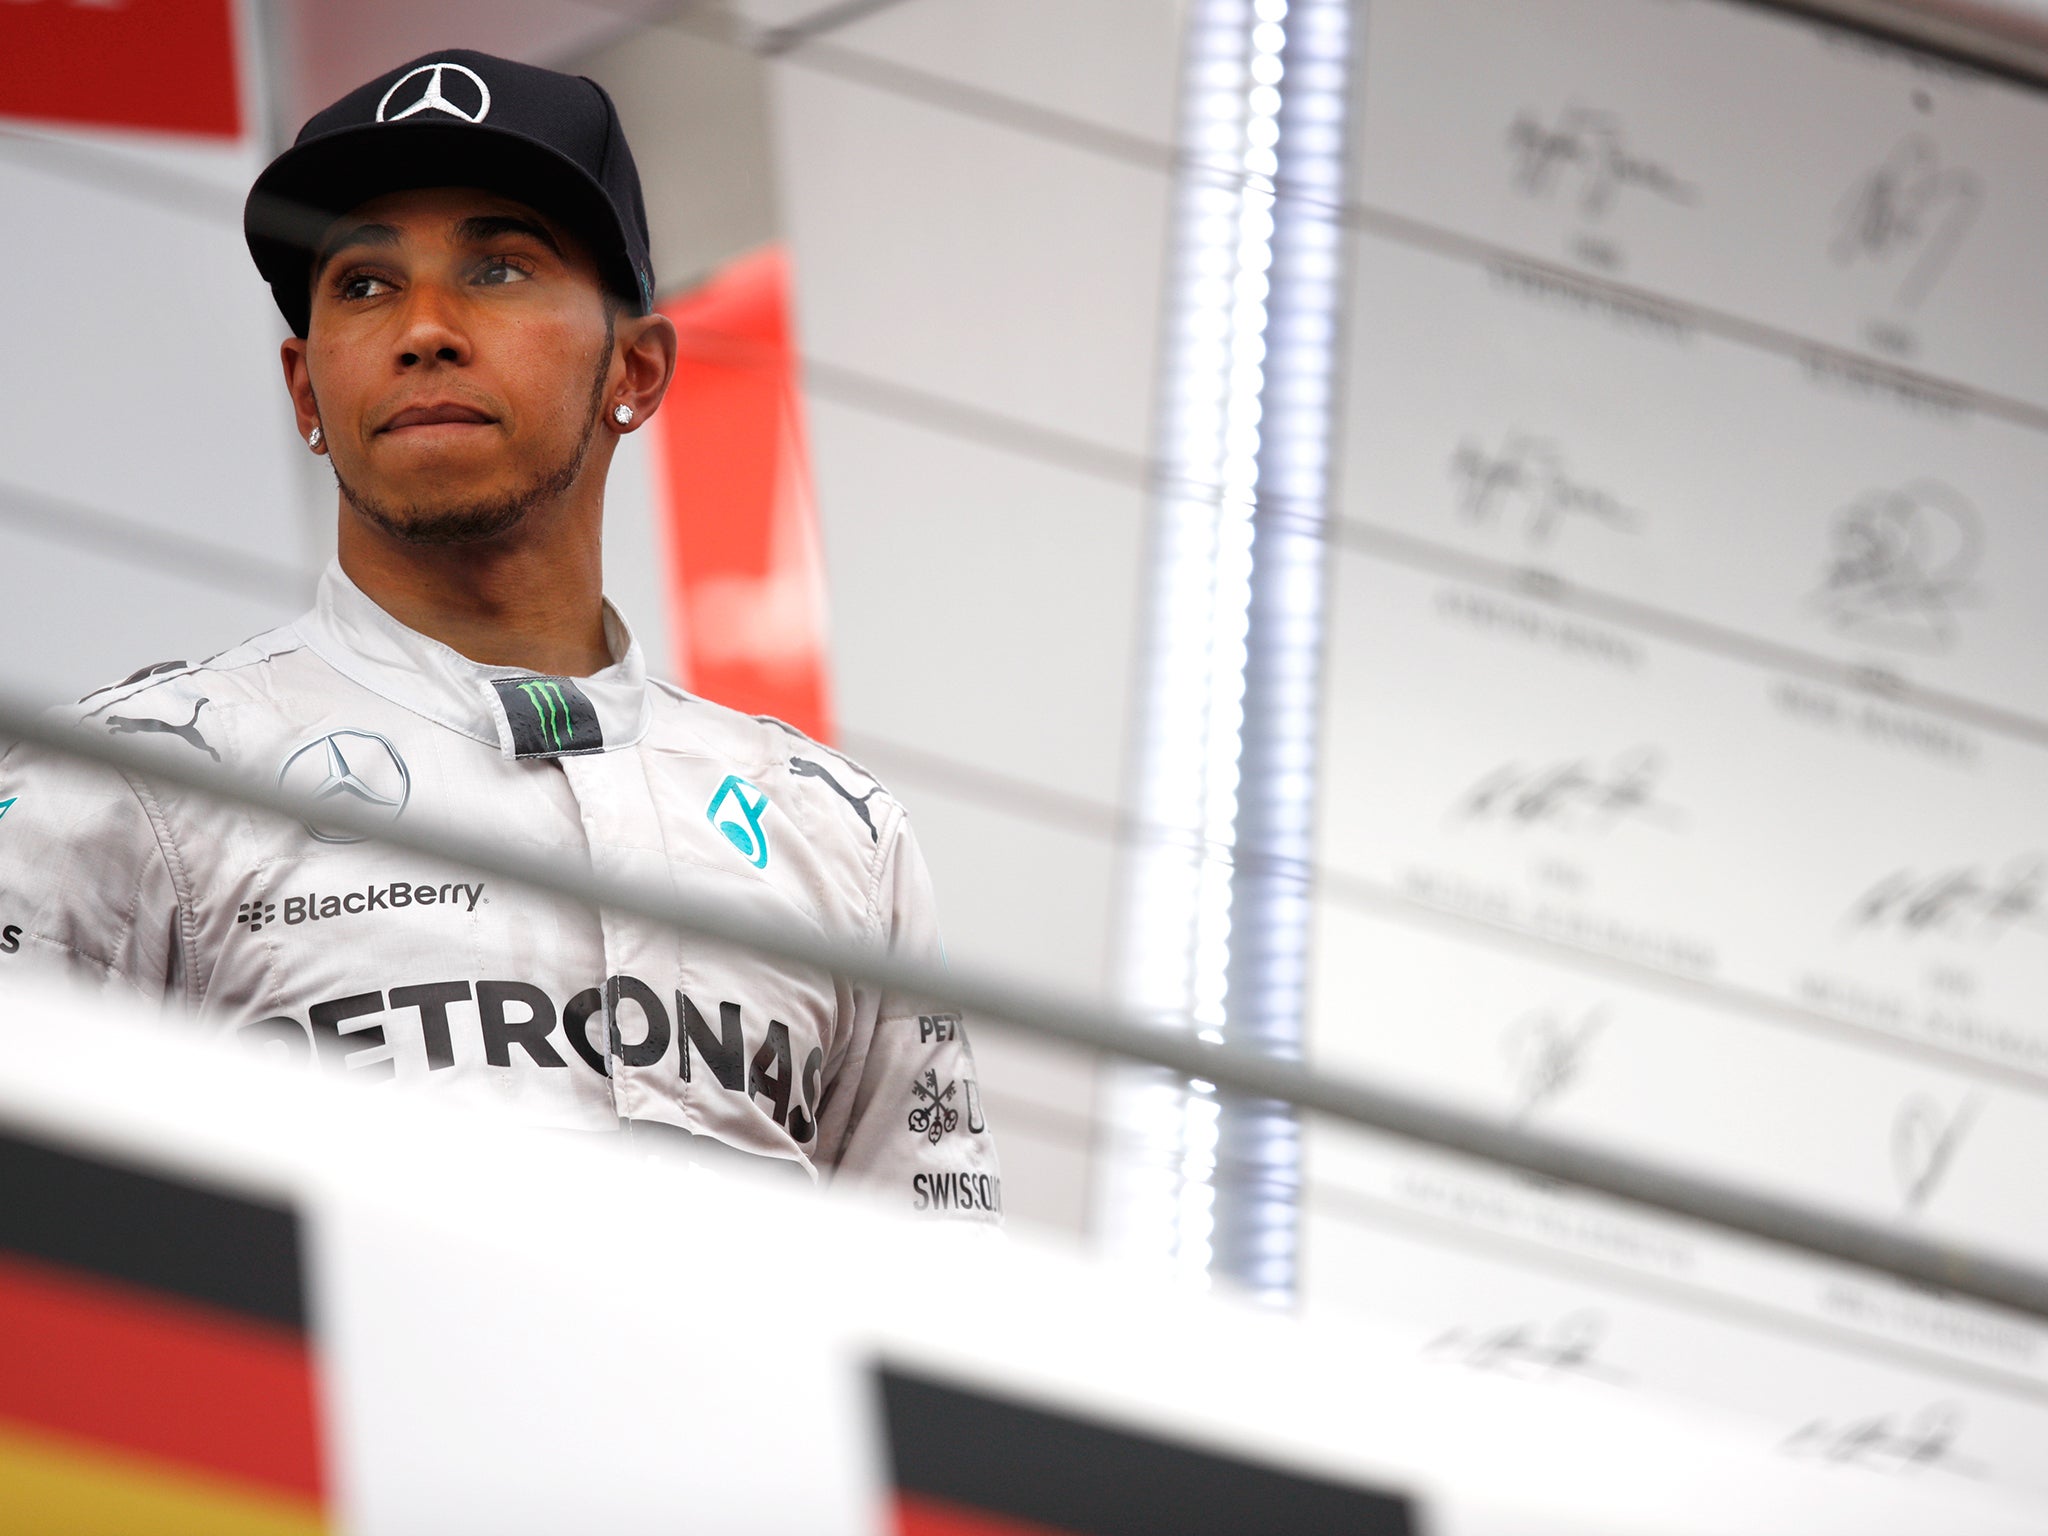 Lewis Hamilton pictured after the German GP